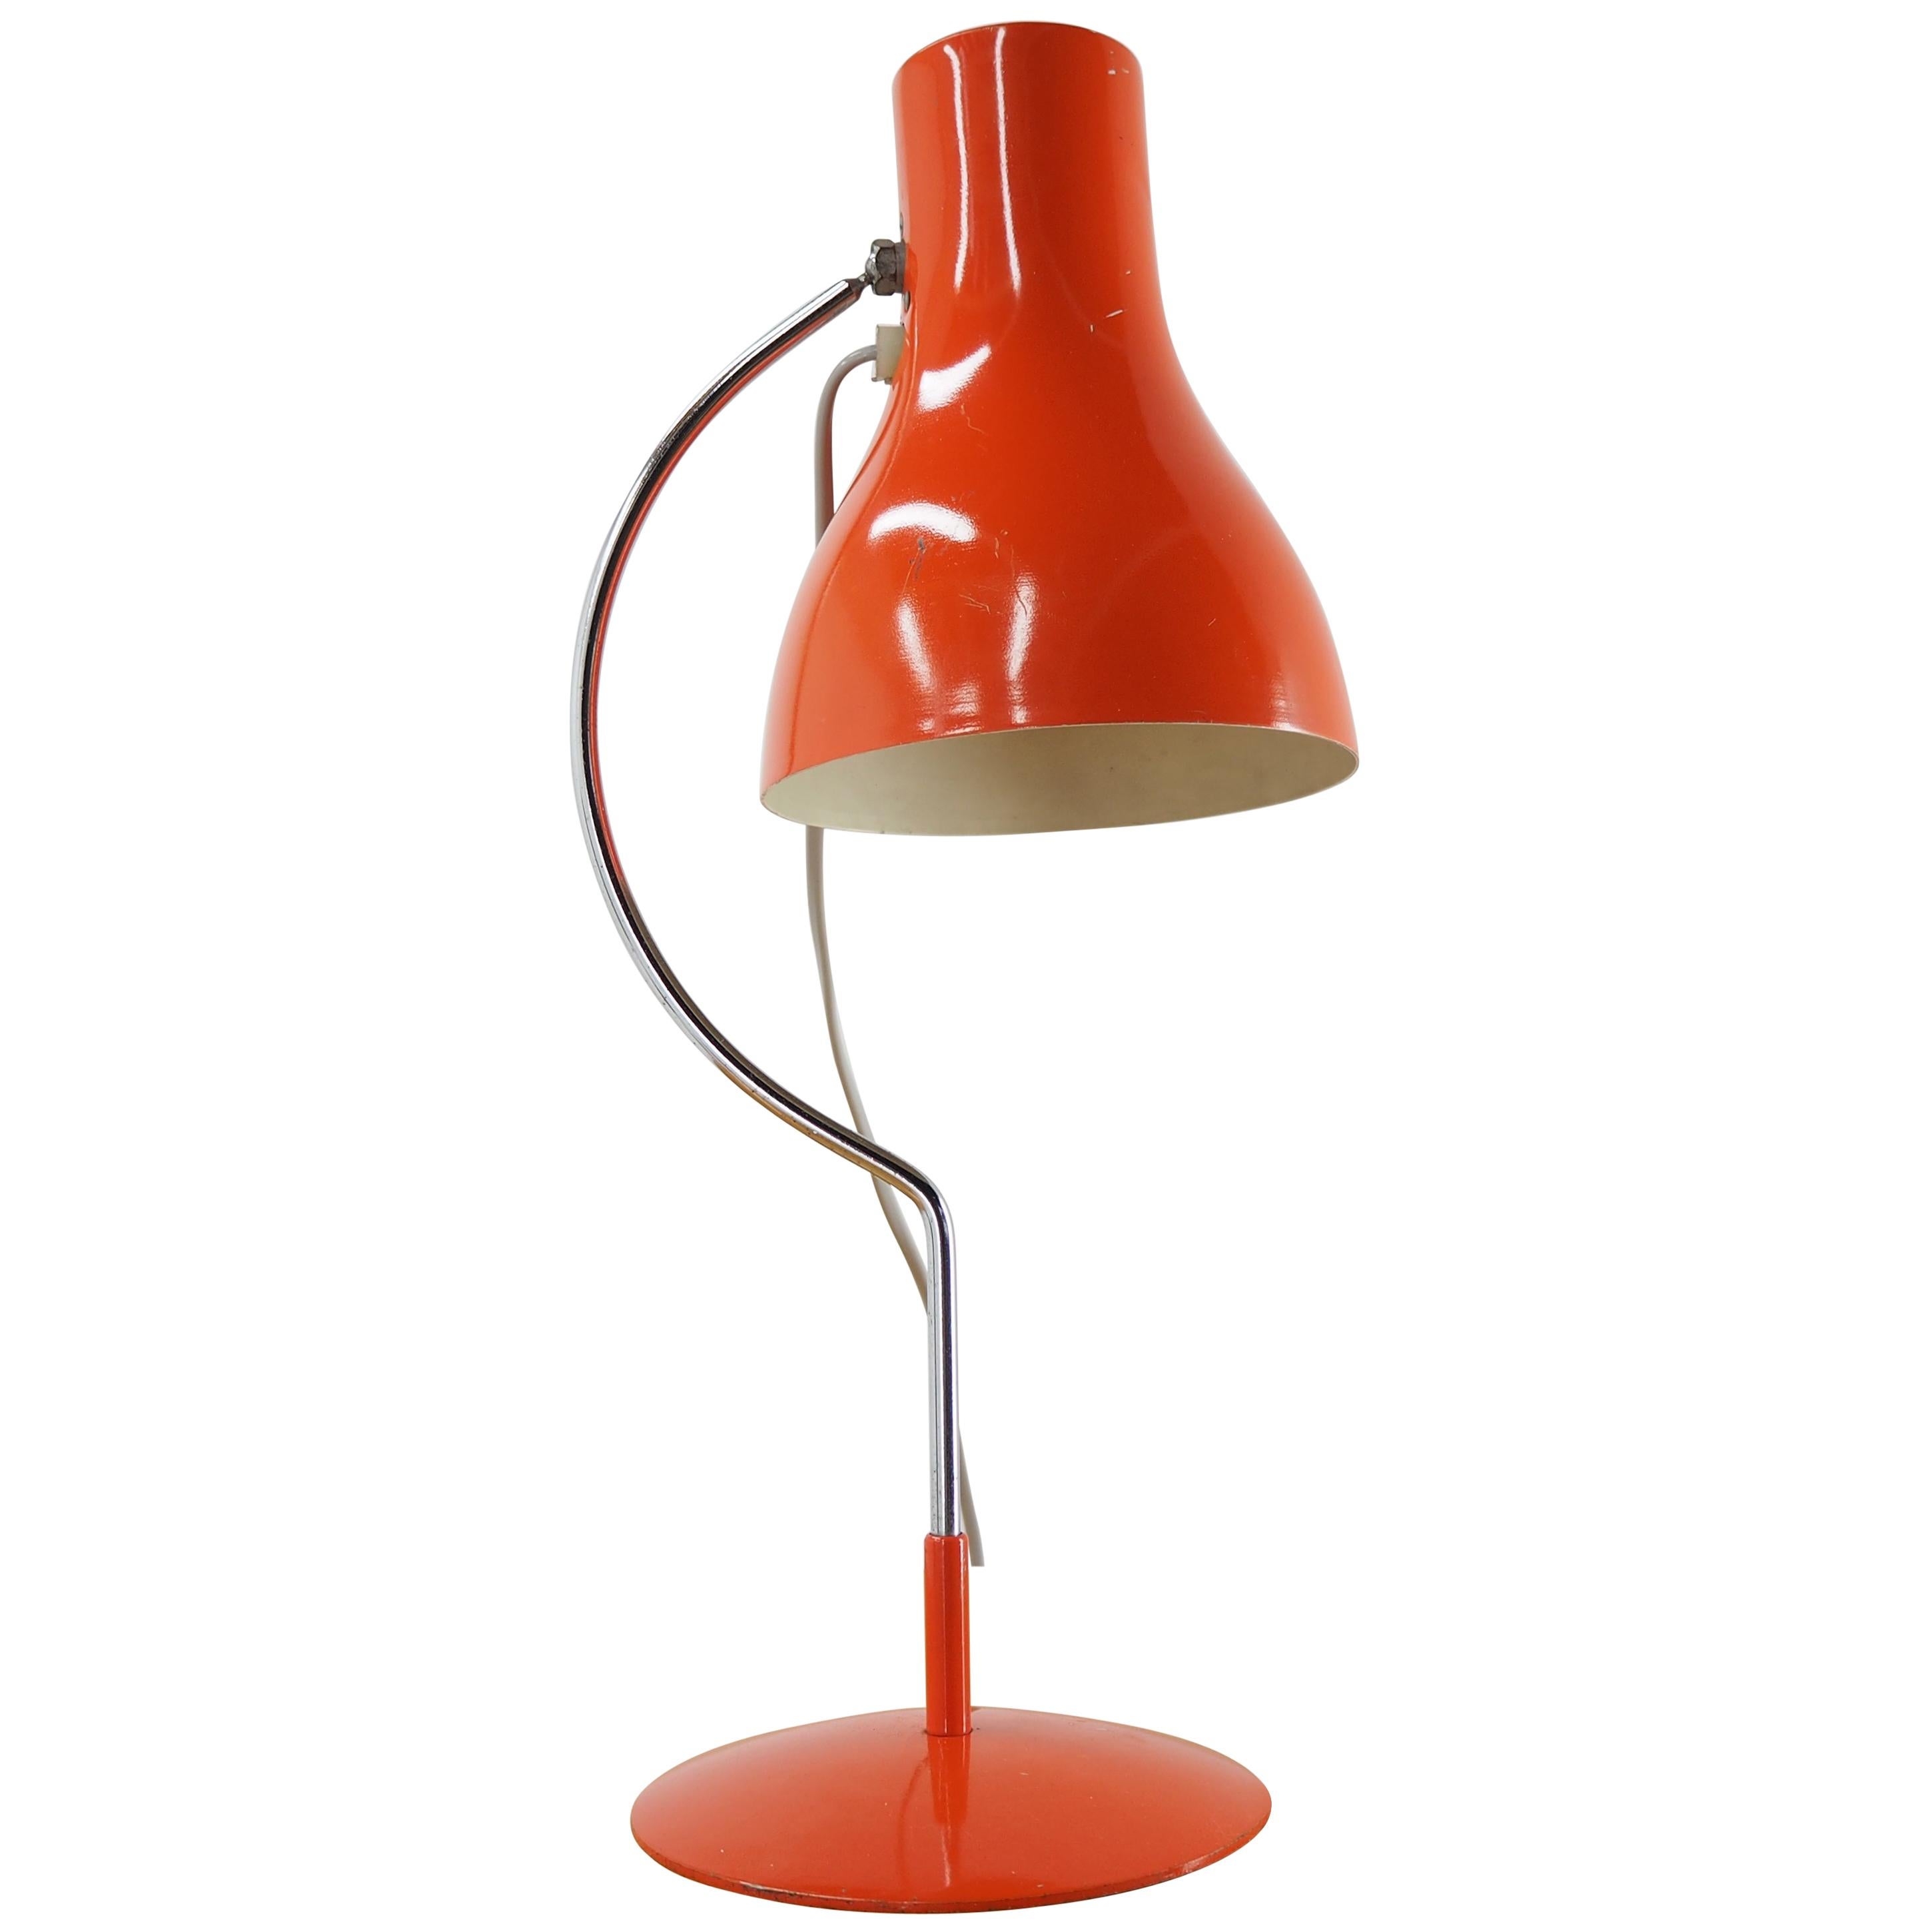 Midcentury Table Lamp Designed by J. Hurka for Napako 1970s type 0521